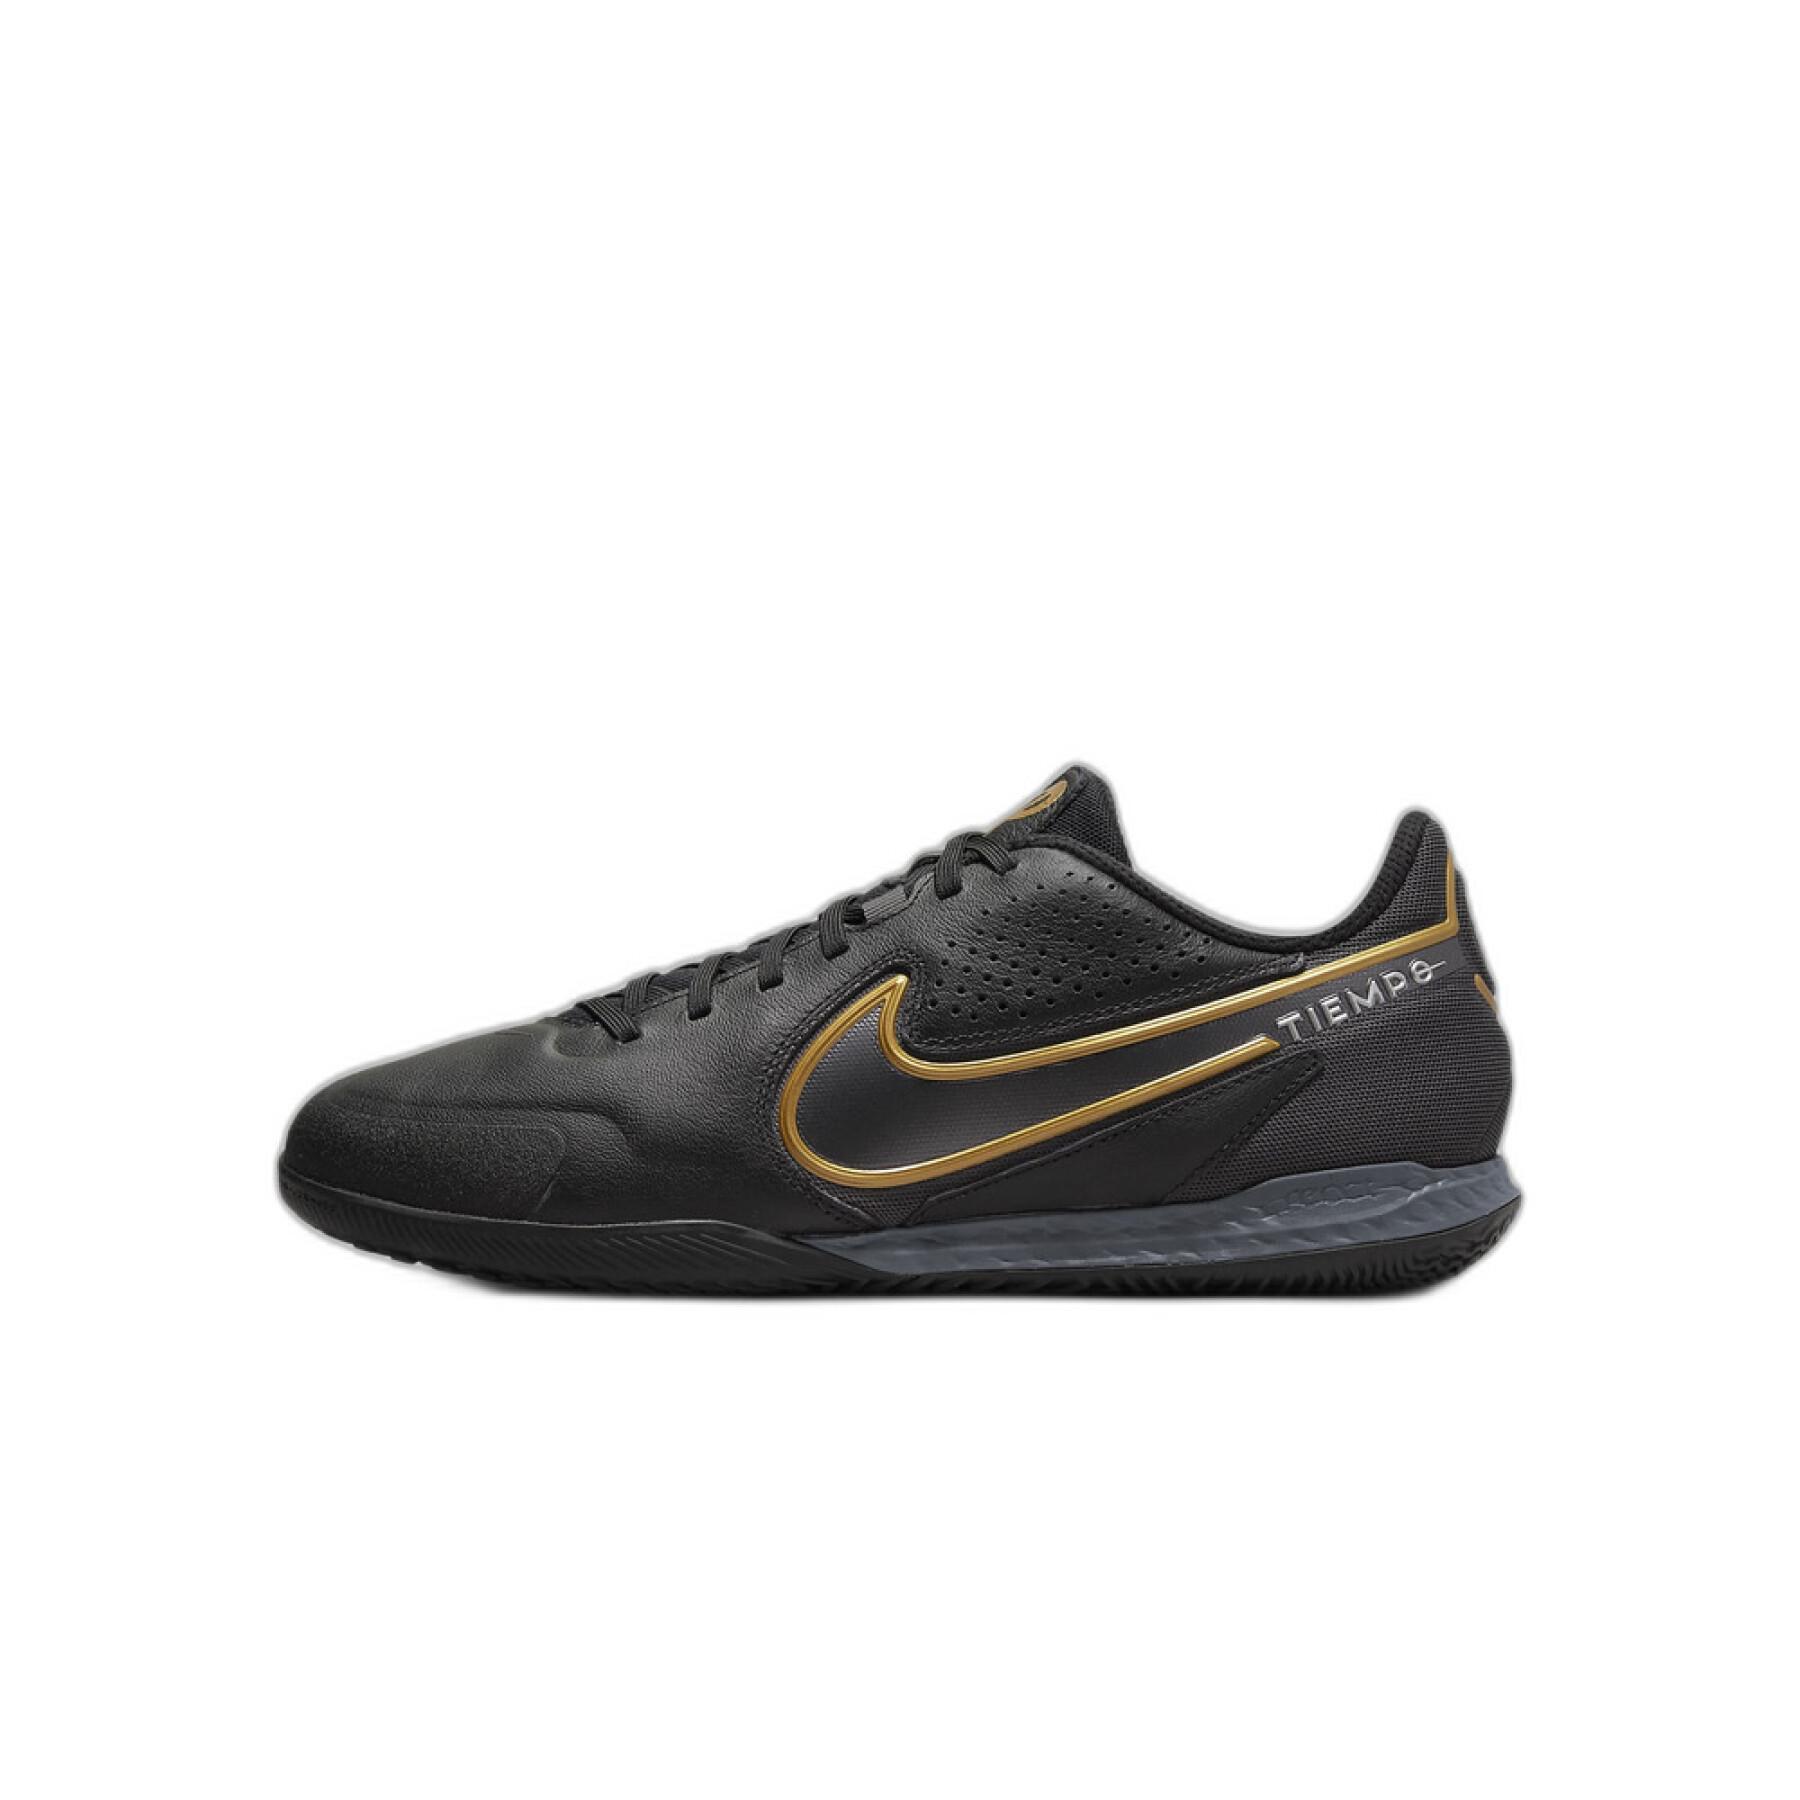 Soccer shoes Nike React Tiempo Legend 9 Pro IC